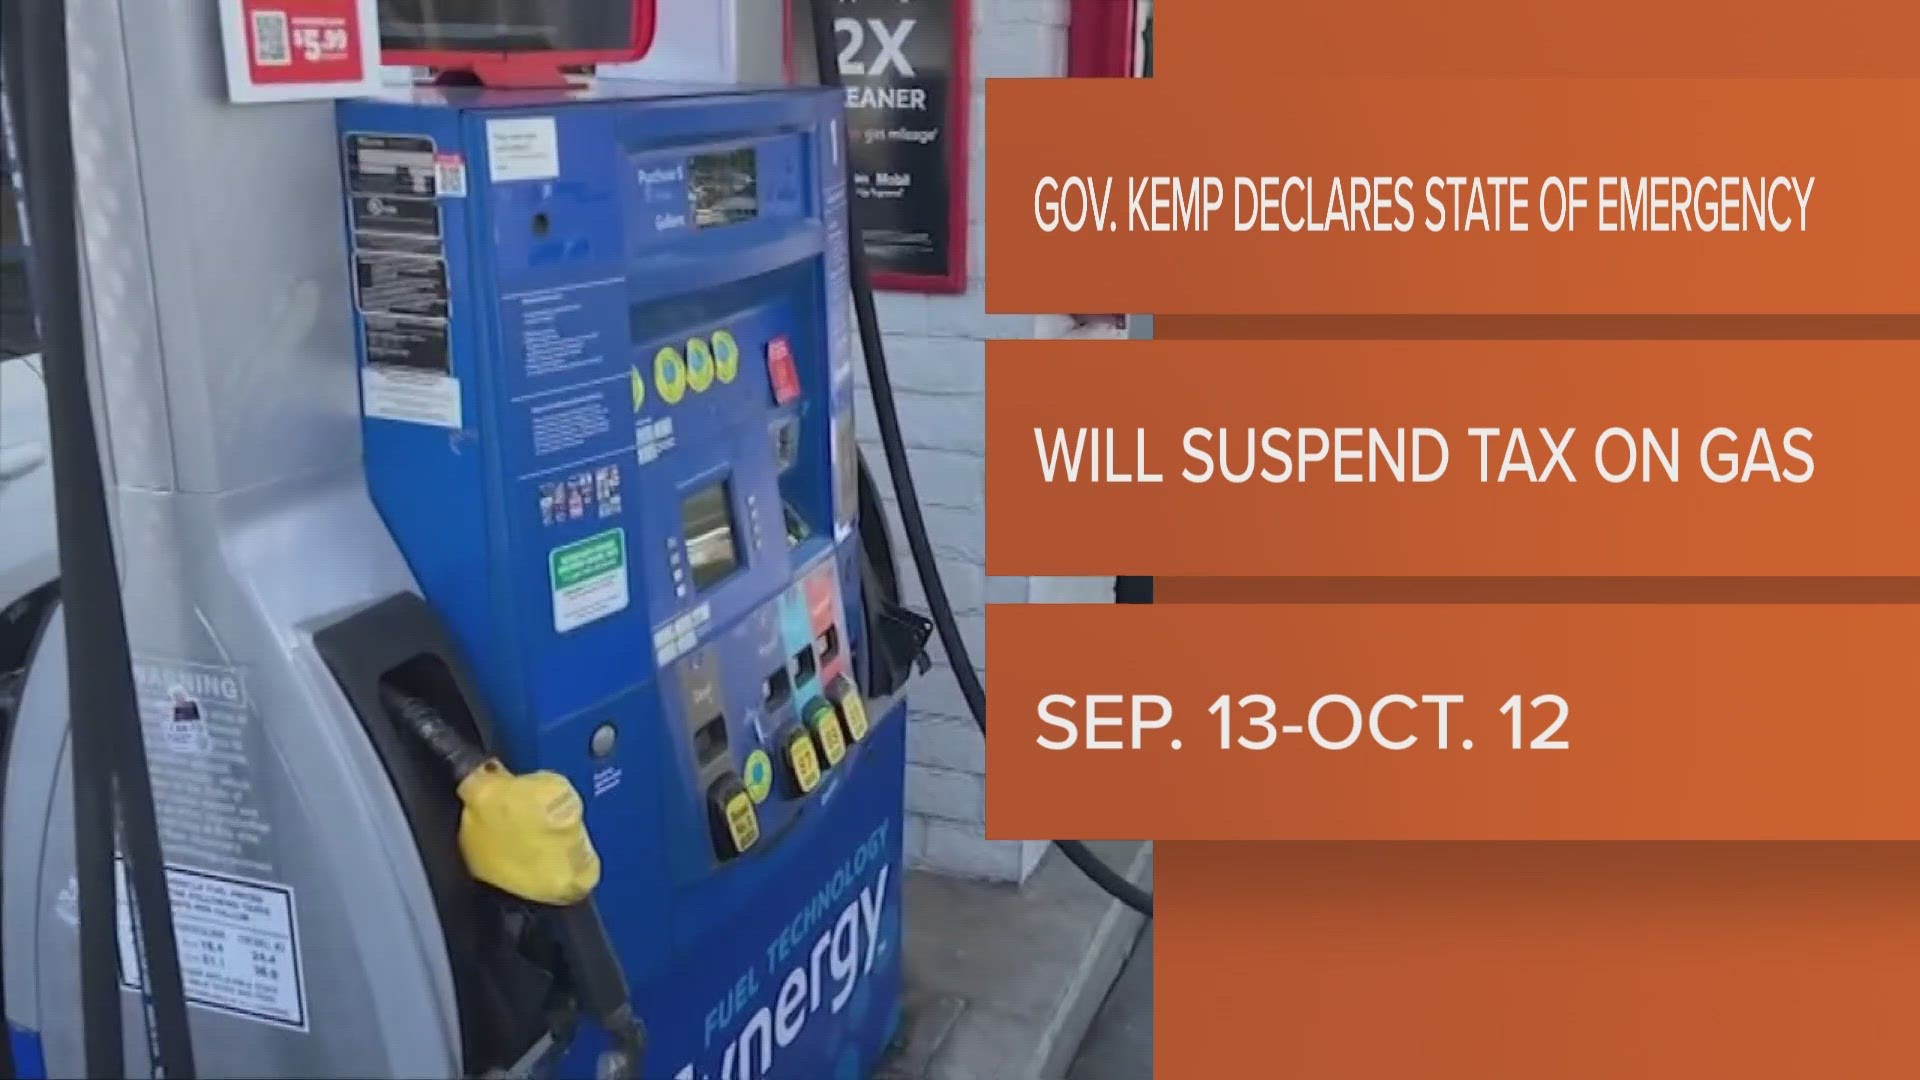 Kemp declared a state of emergency because of the 40-year high inflation. The temporary tax suspension on gas in Georgia starts Wednesday and lasts until Oct. 12.